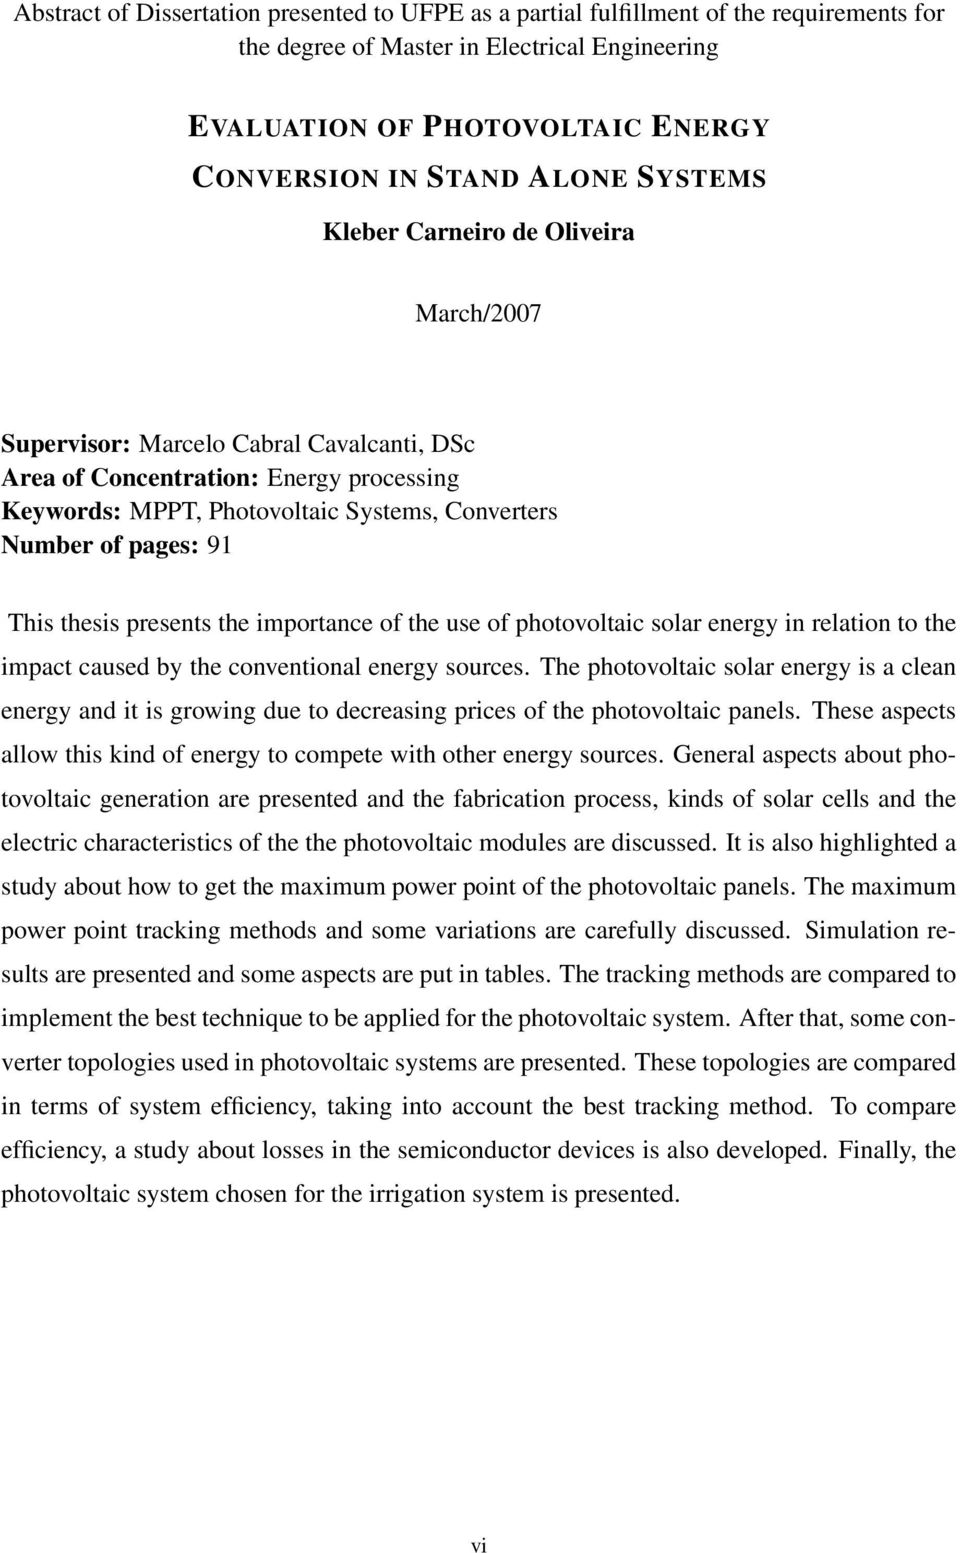 This thesis presents the importance of the use of photovoltaic solar energy in relation to the impact caused by the conventional energy sources.